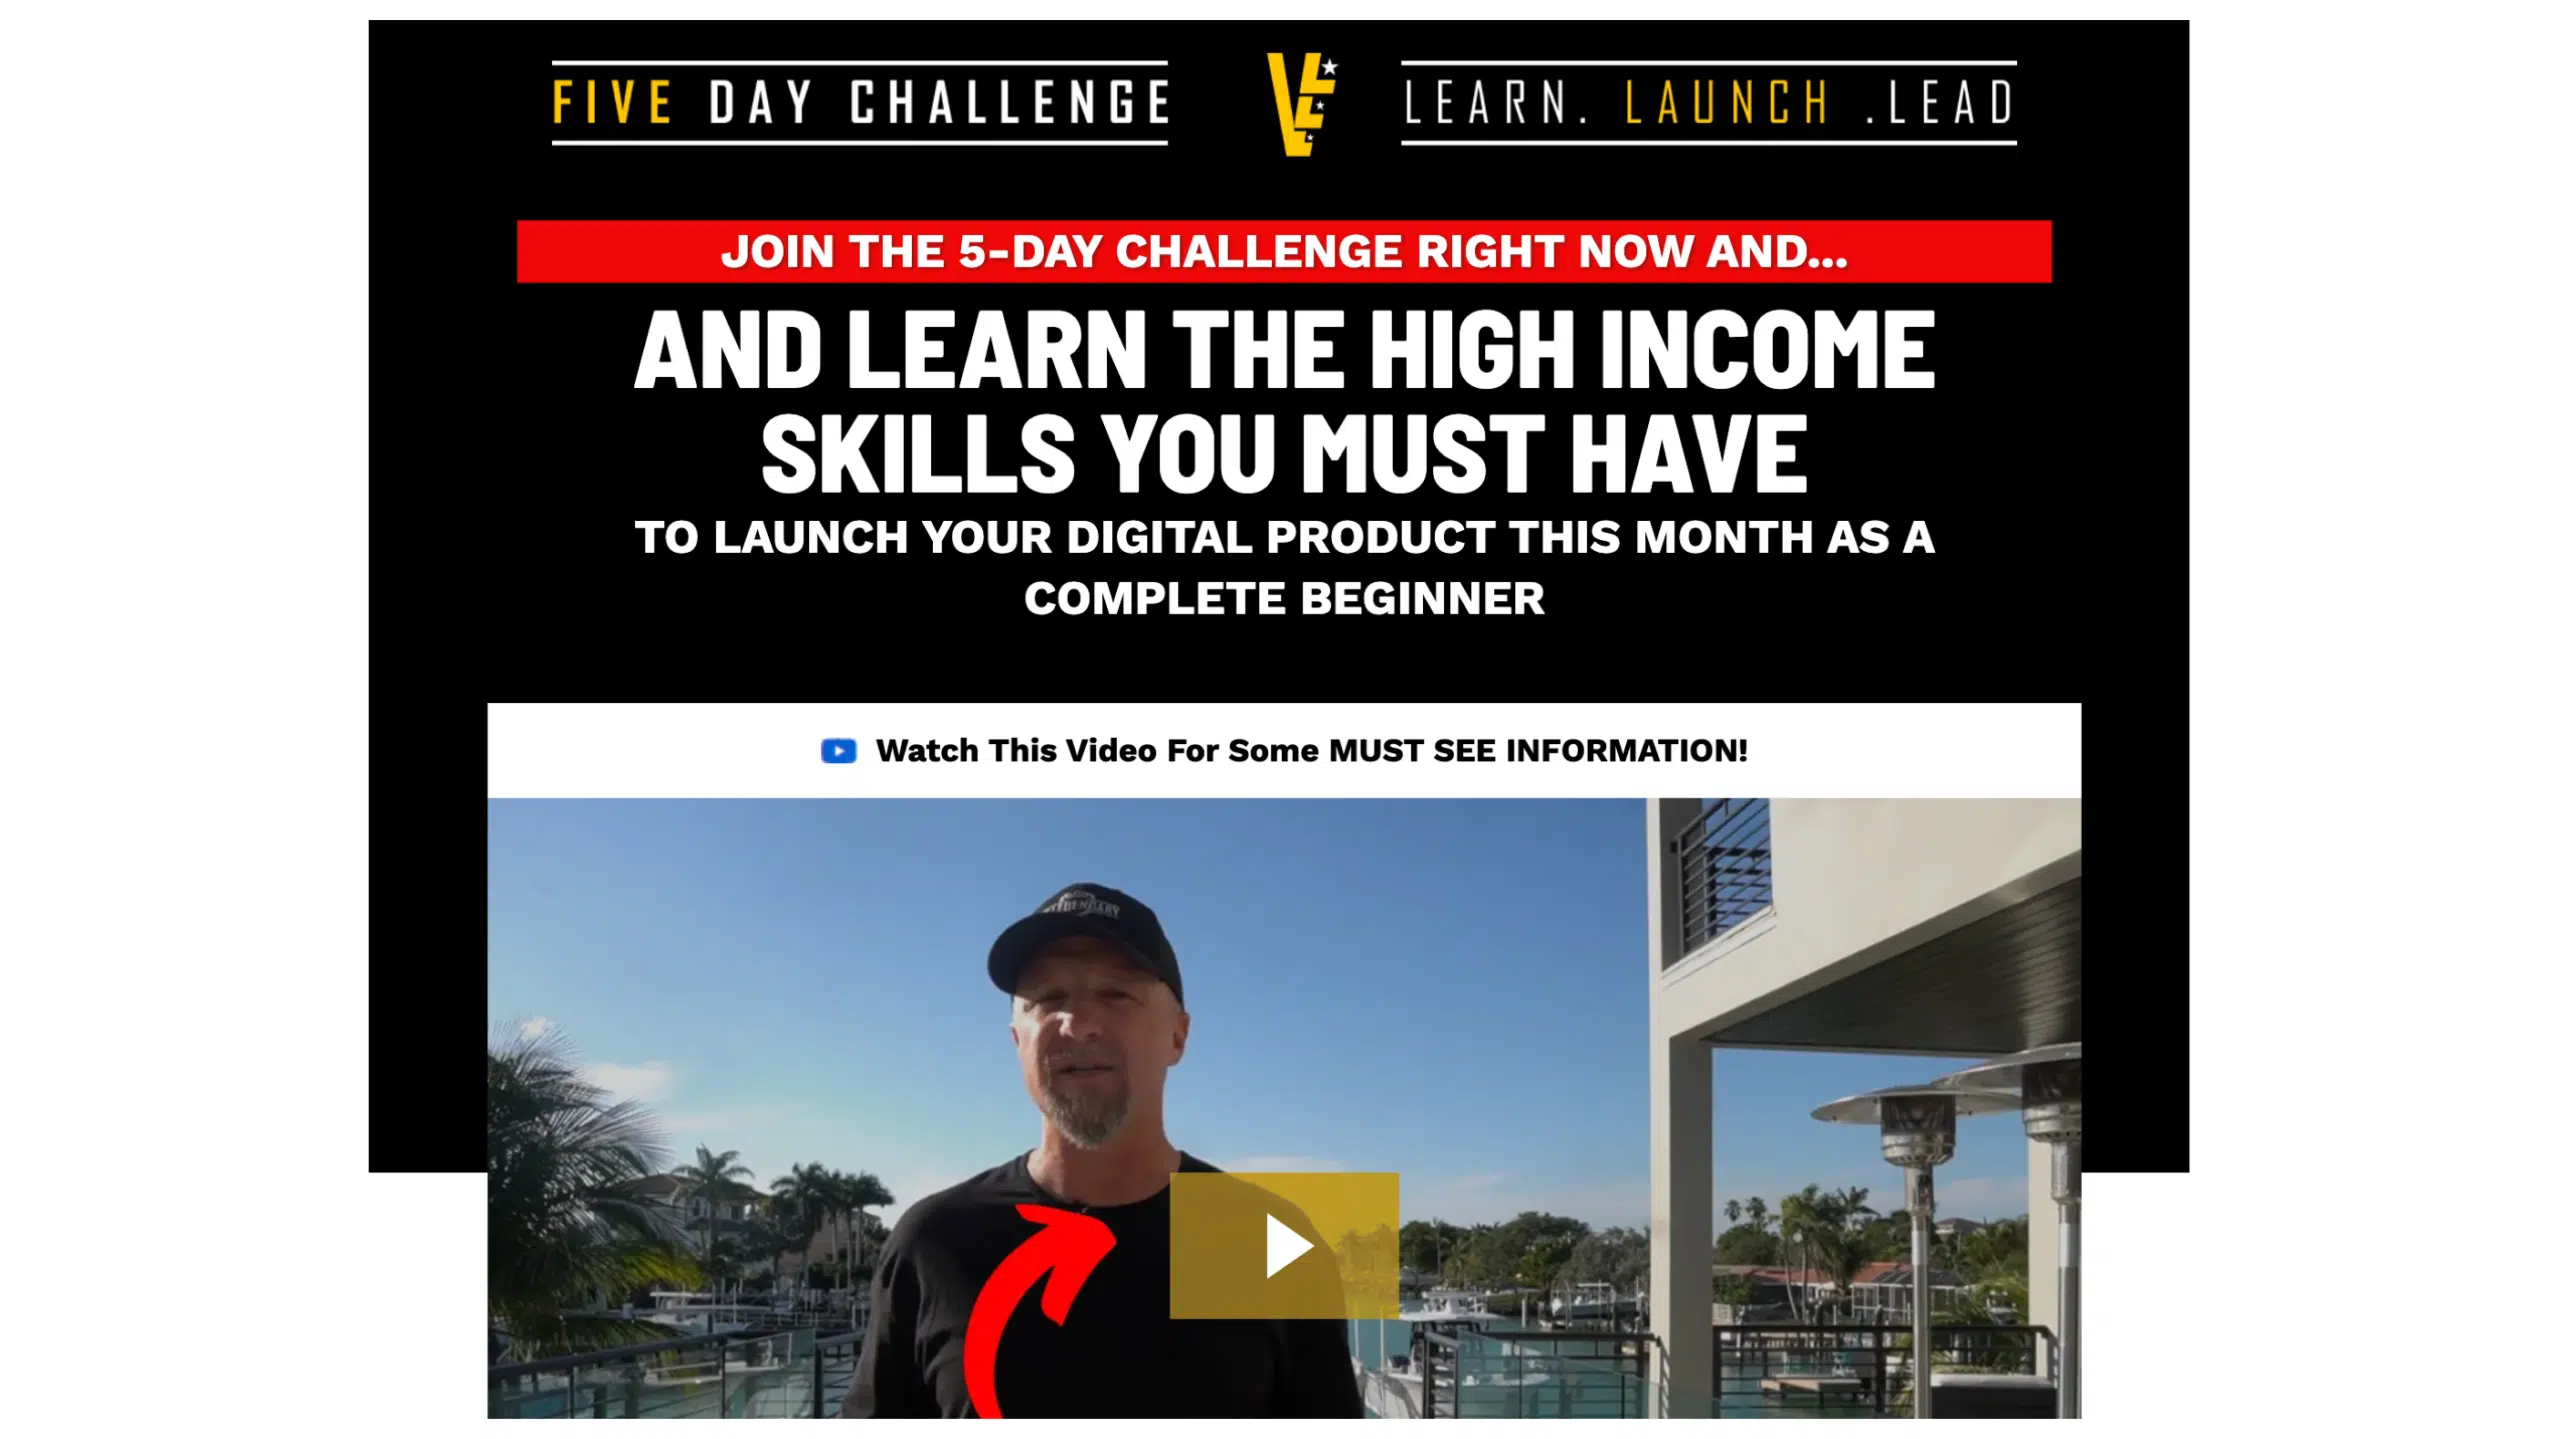 legendary marketer 5 day challenge landing page